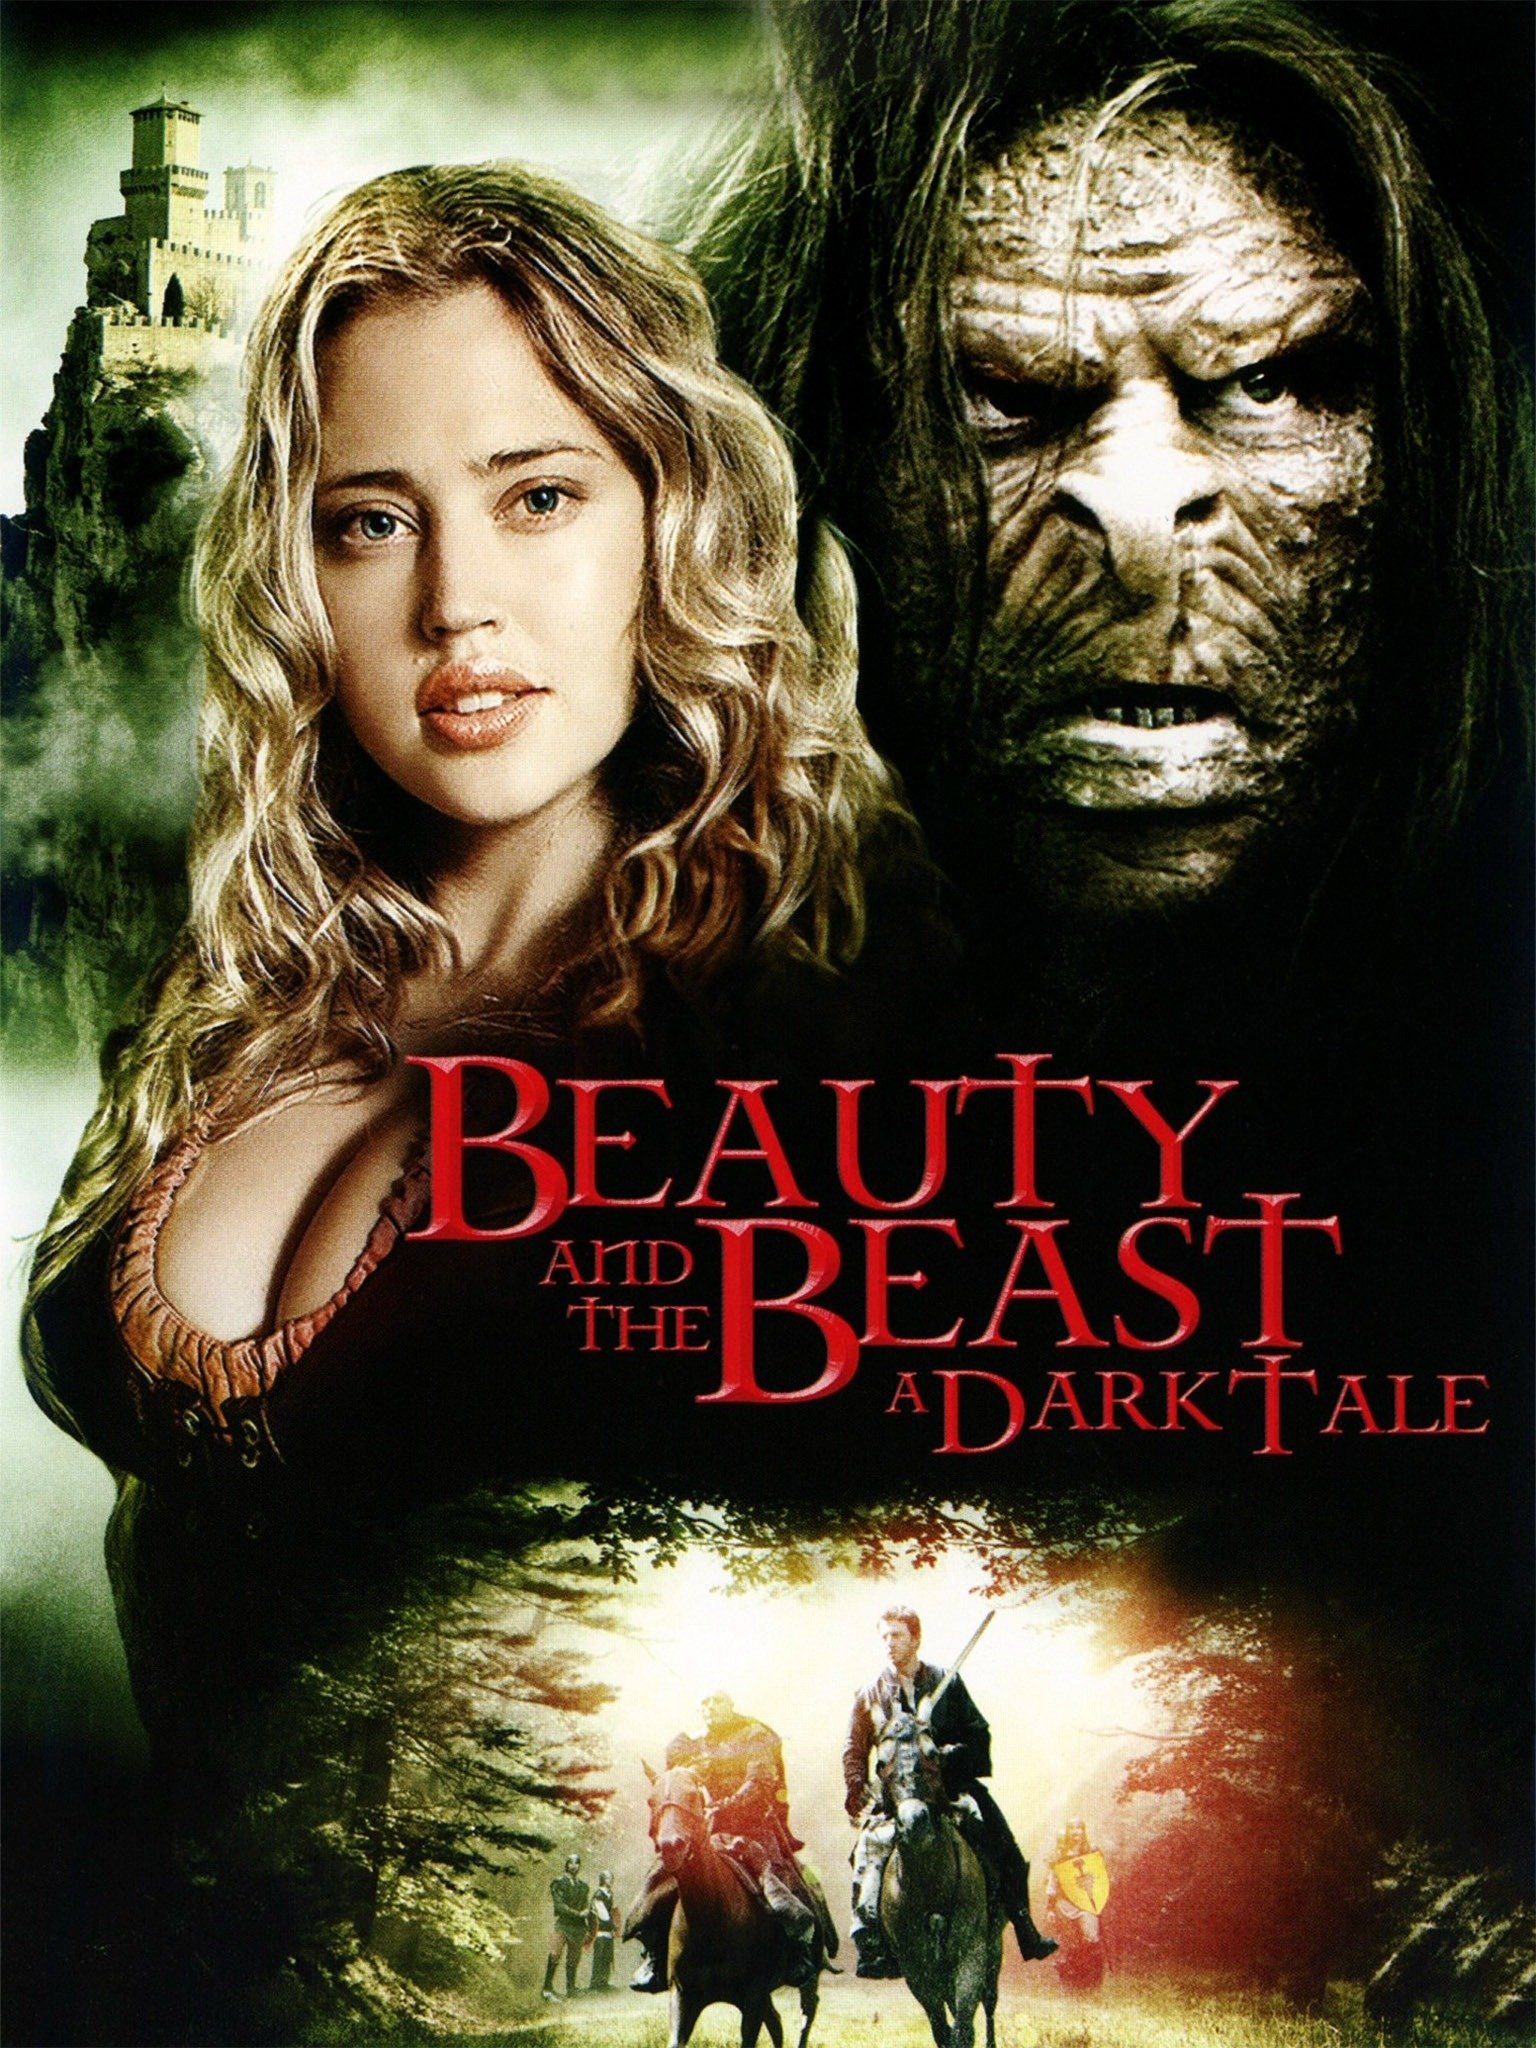 Beauty And The Beast A Dark Tale Movie Reviews